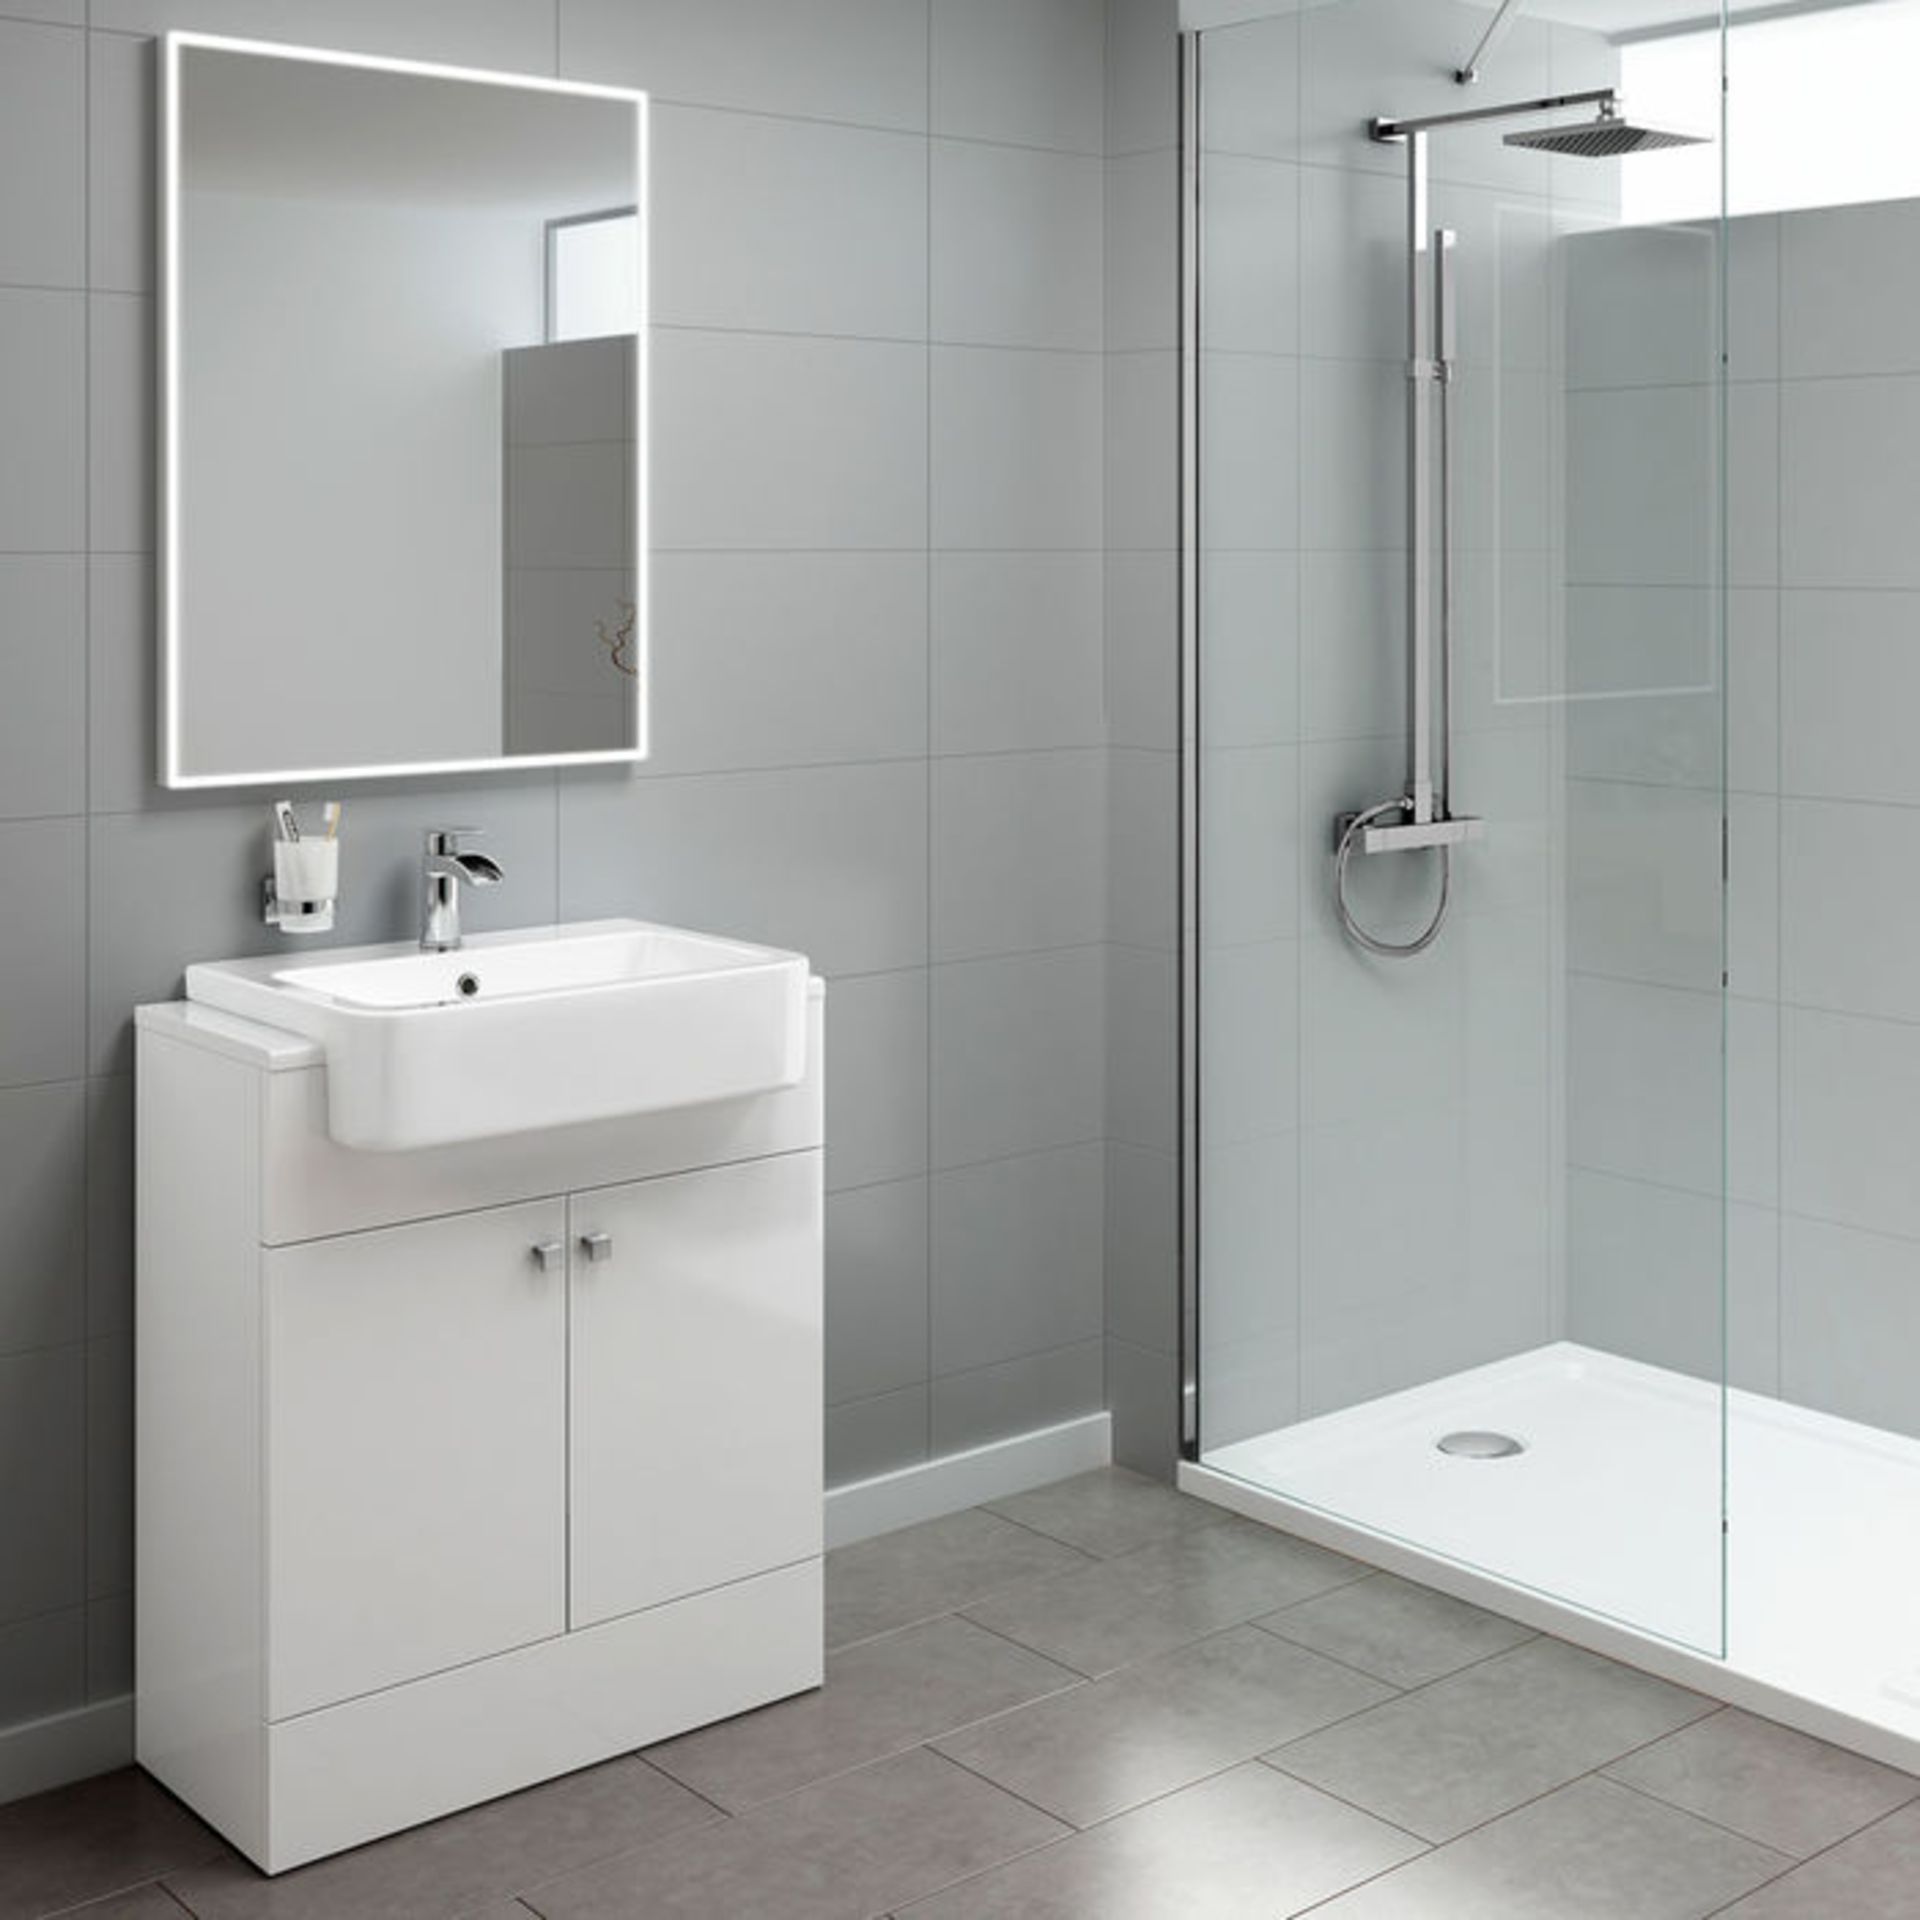 (H20) 660mm Harper Gloss White Basin Vanity Unit - Floor Standing RRP £449.99. COMES COMPLETE WITH - Image 2 of 5